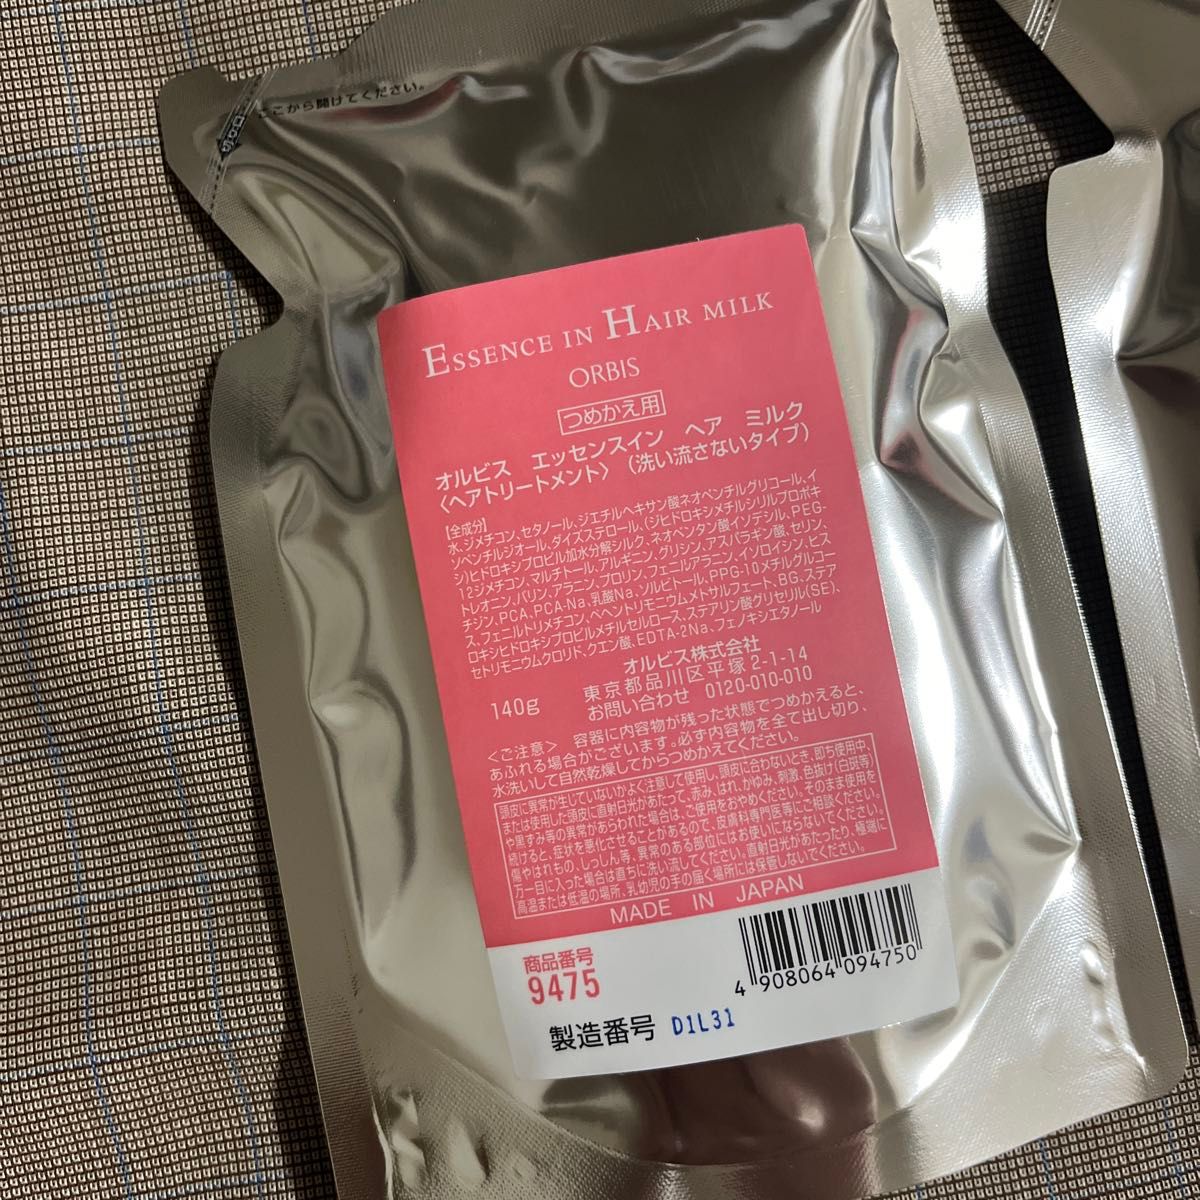 ORBIS オルビス エッセンスインヘアミルク　詰め替え用　140g 2袋セット